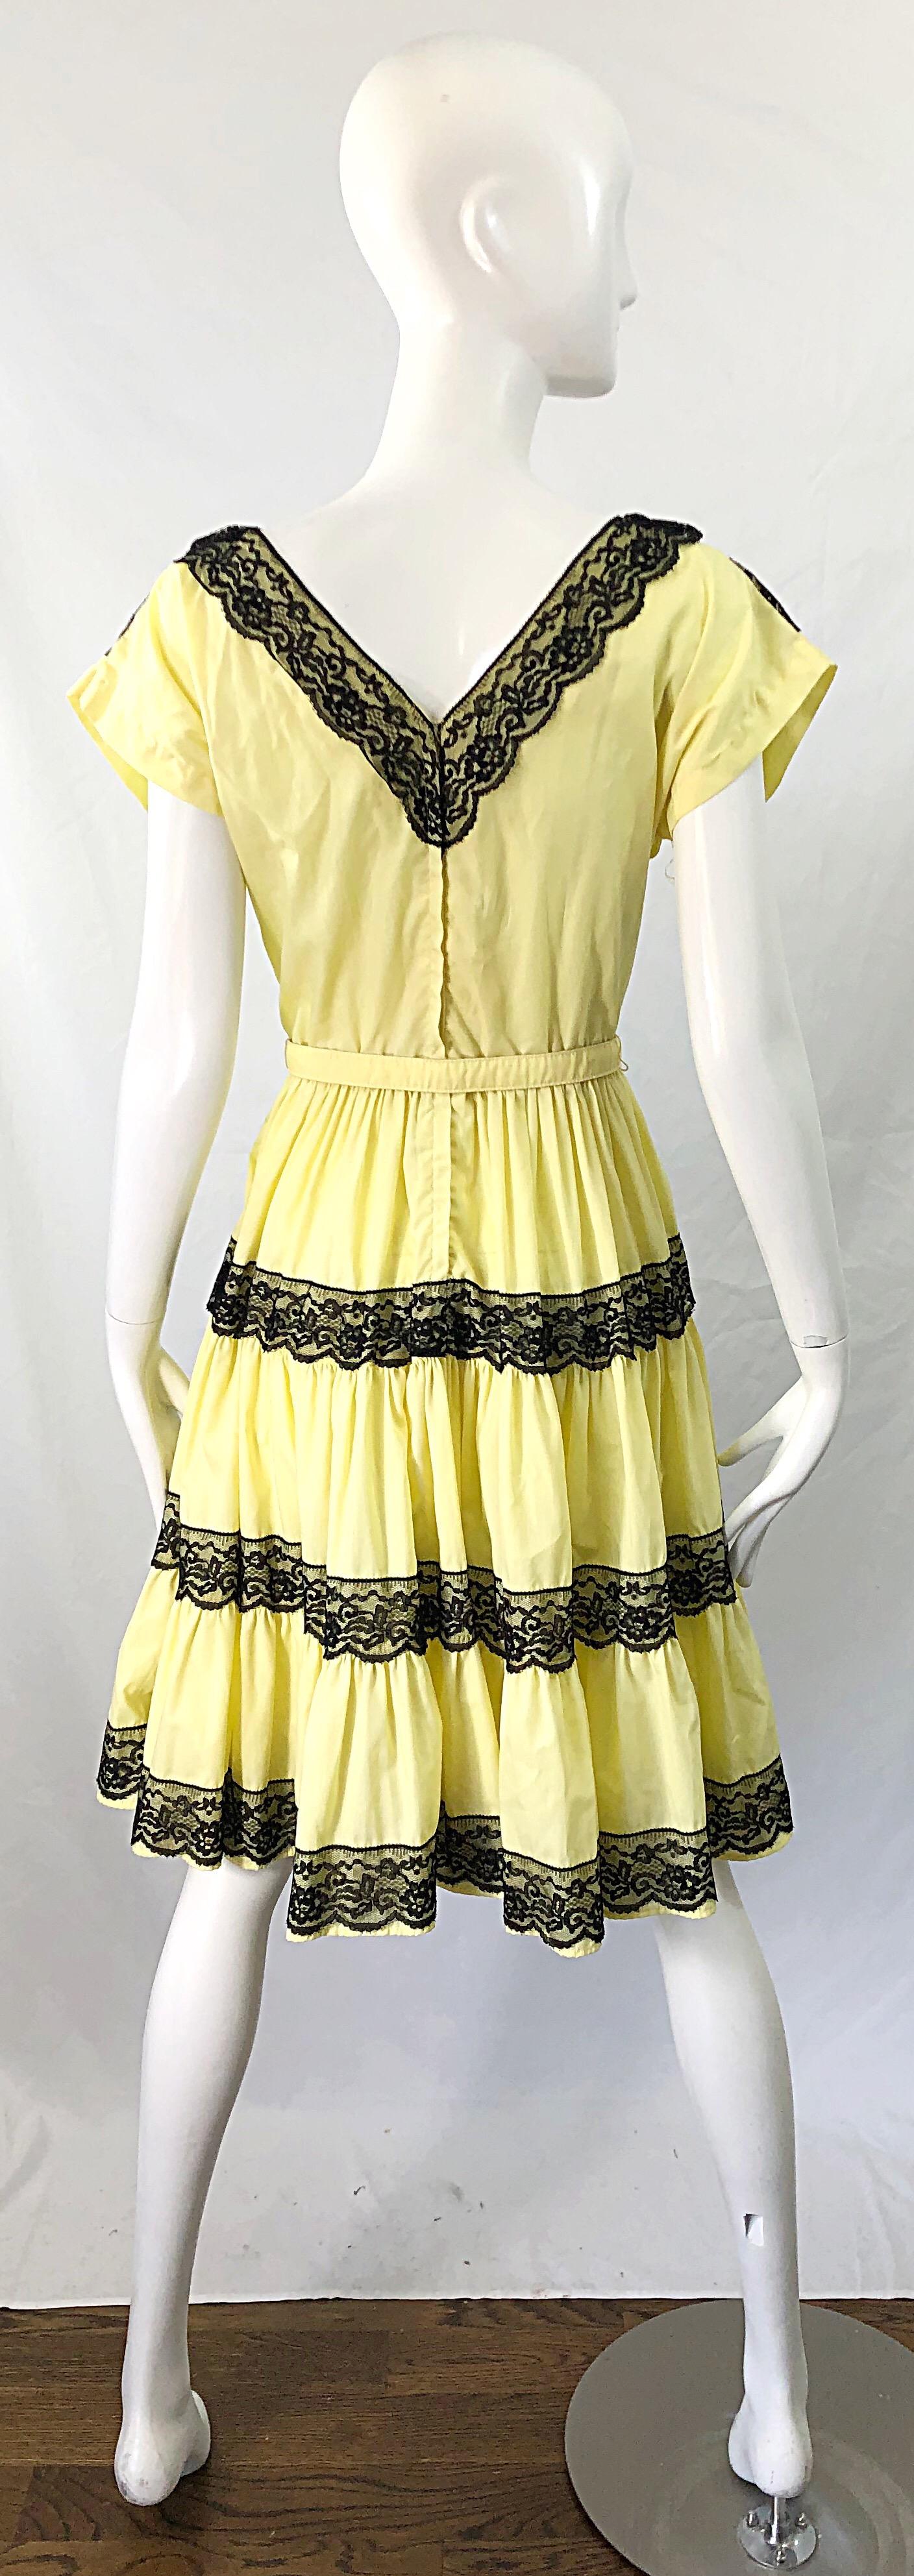 1950s Bettina of Miami Yellow + Black Cotton Lace Fit n' Flare Vintage 50s Dress For Sale 2